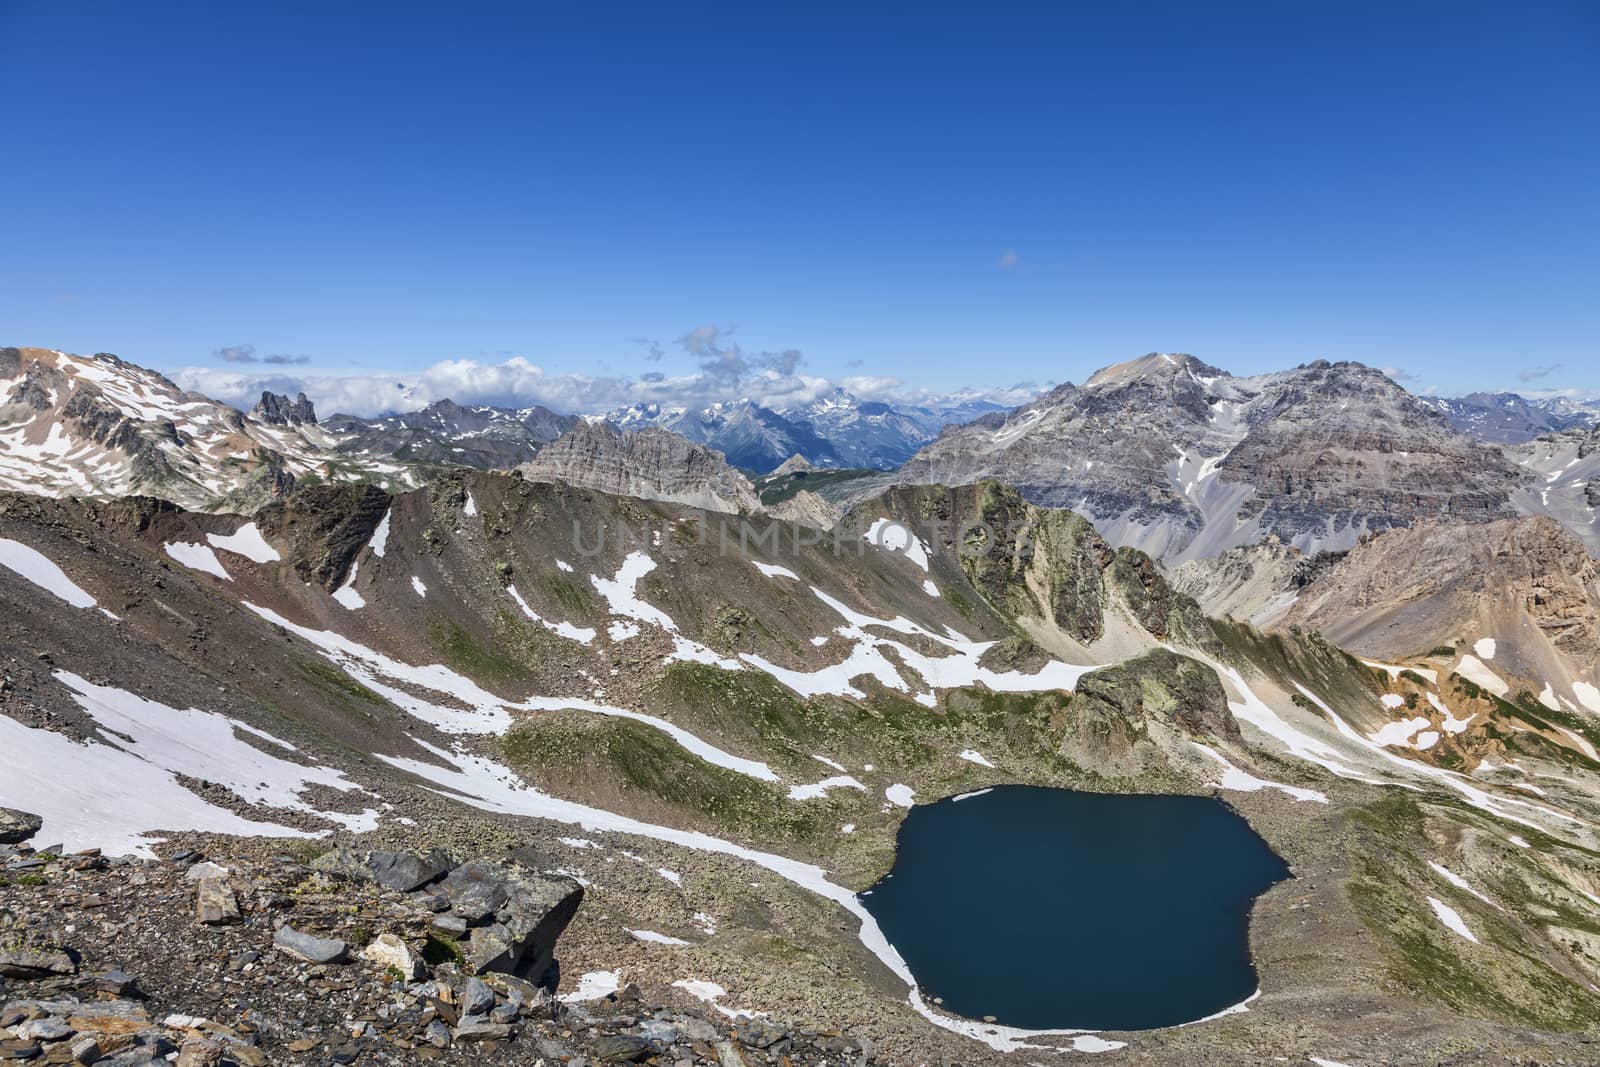 Image of the Lac Blanc (White Lake) located at 2699 m on Vallee de la Claree (Claree Valley) in Hautes Alpes department in France. The place is located in one of the wildest hiking trail in the high French Alps.